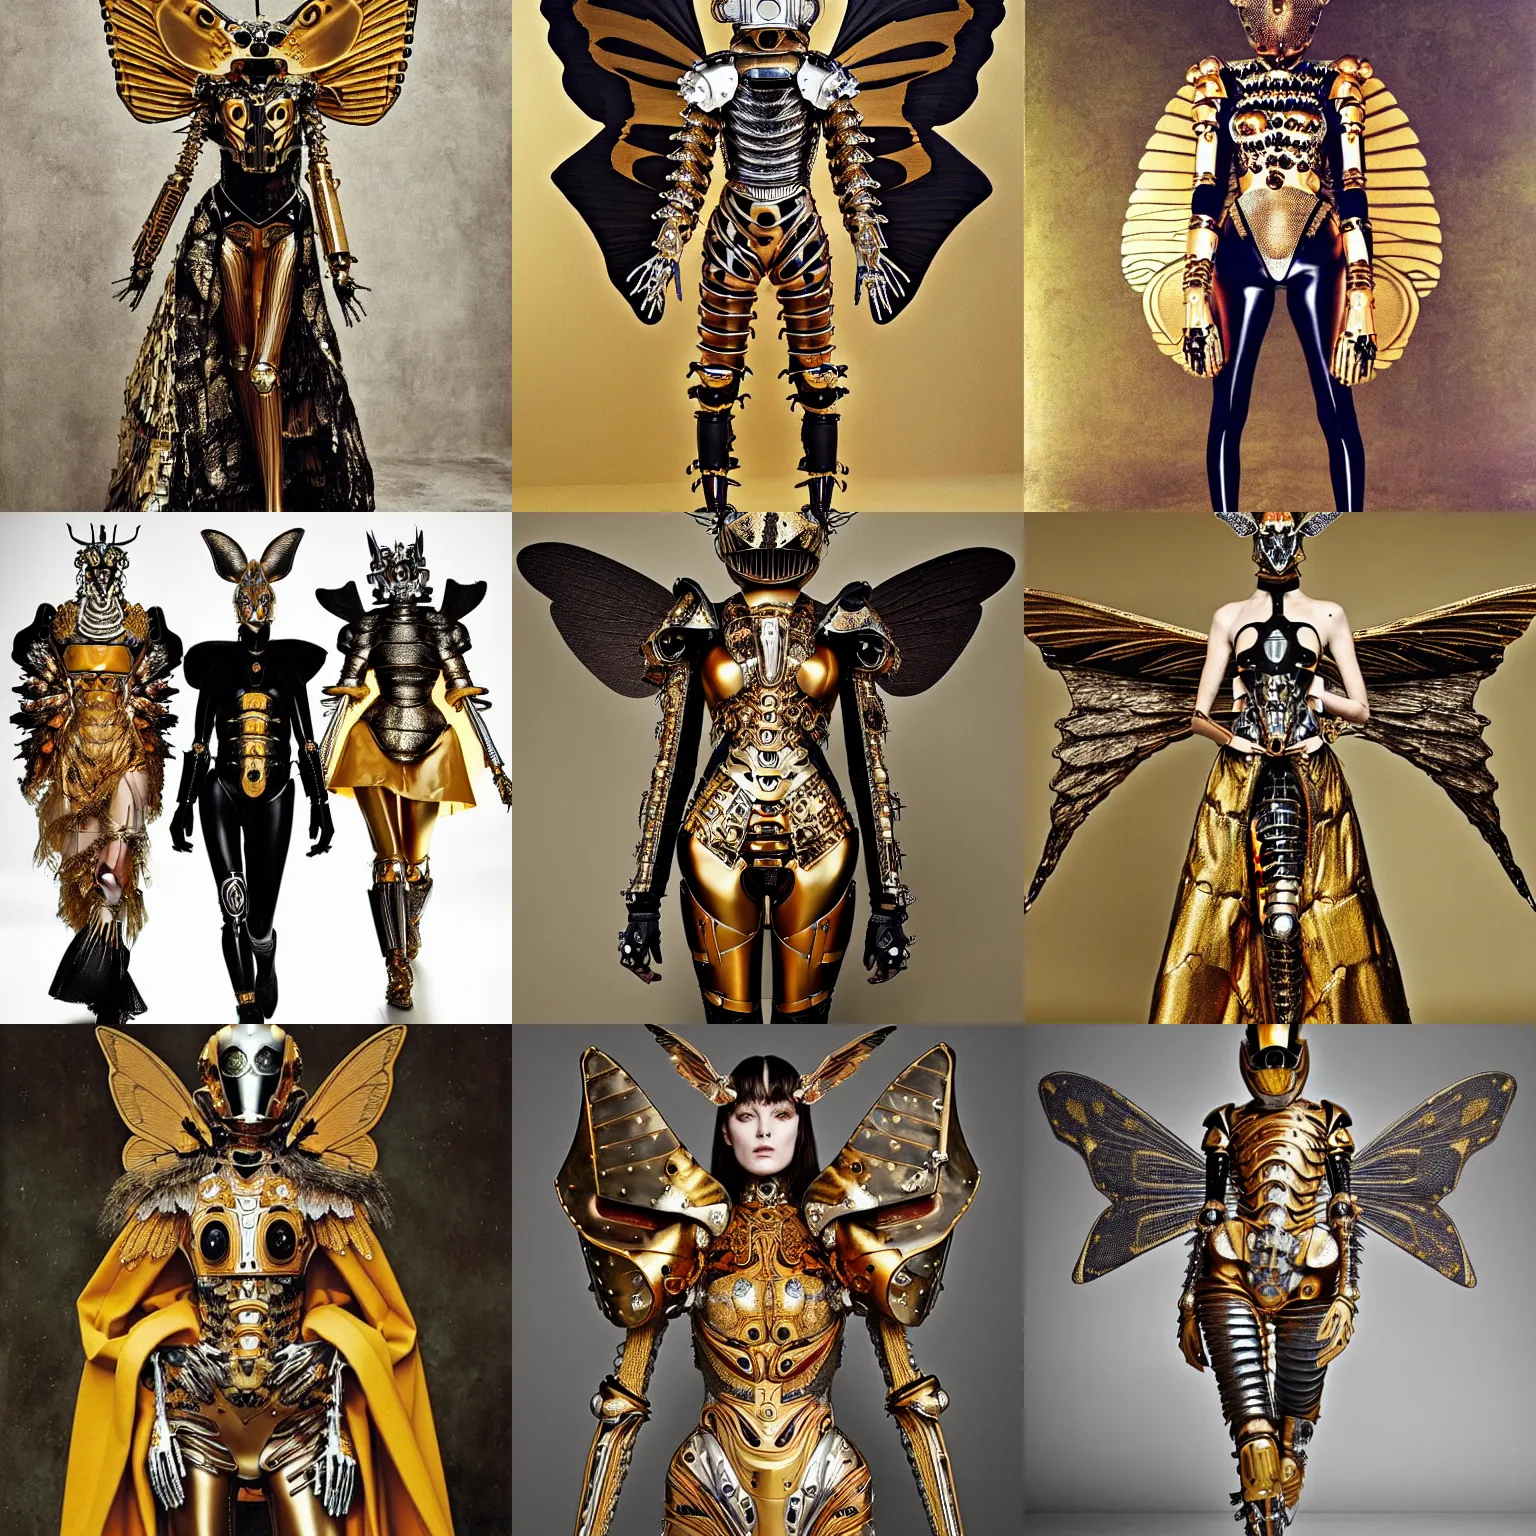 Prompt: haute couture paladin editorial by klimt, biomechanical hornet with metal couture wings by malczewski, ornate power armour knight in gold and bizmuth by giger